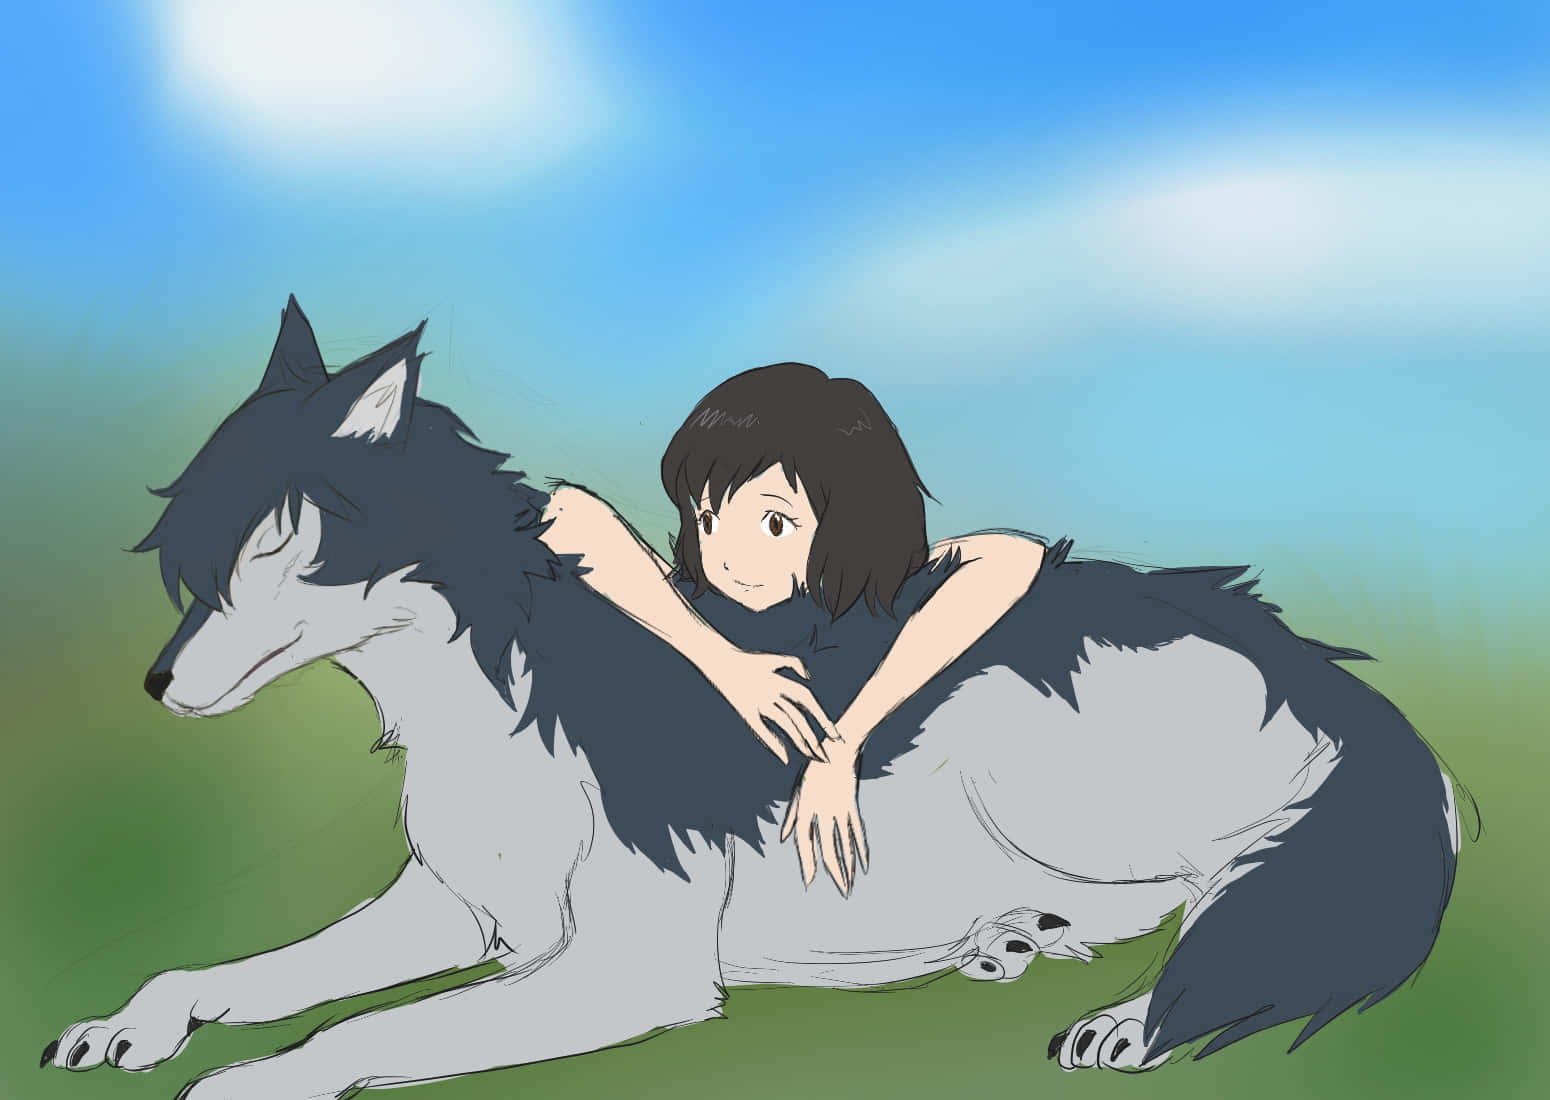 Wolf Children embrace from a distance, connecting through love Wallpaper